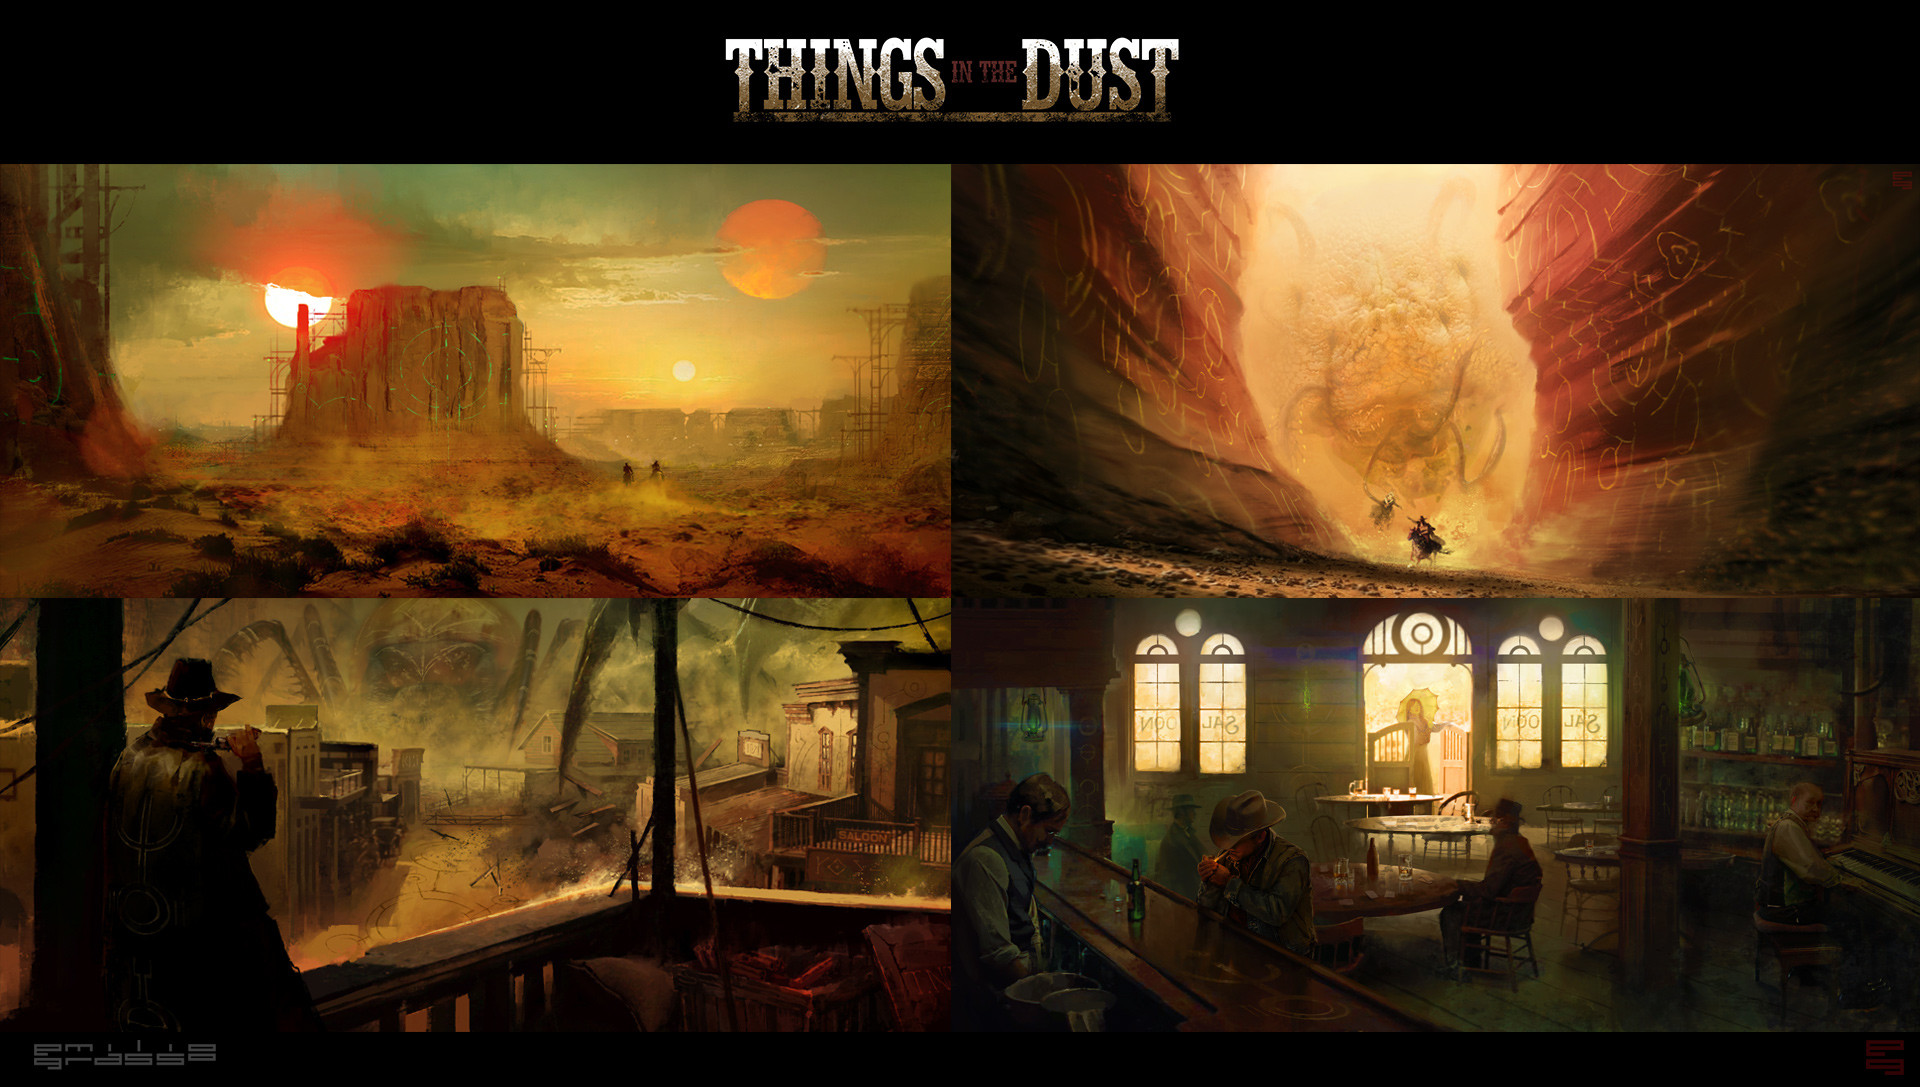 Things In The Dust